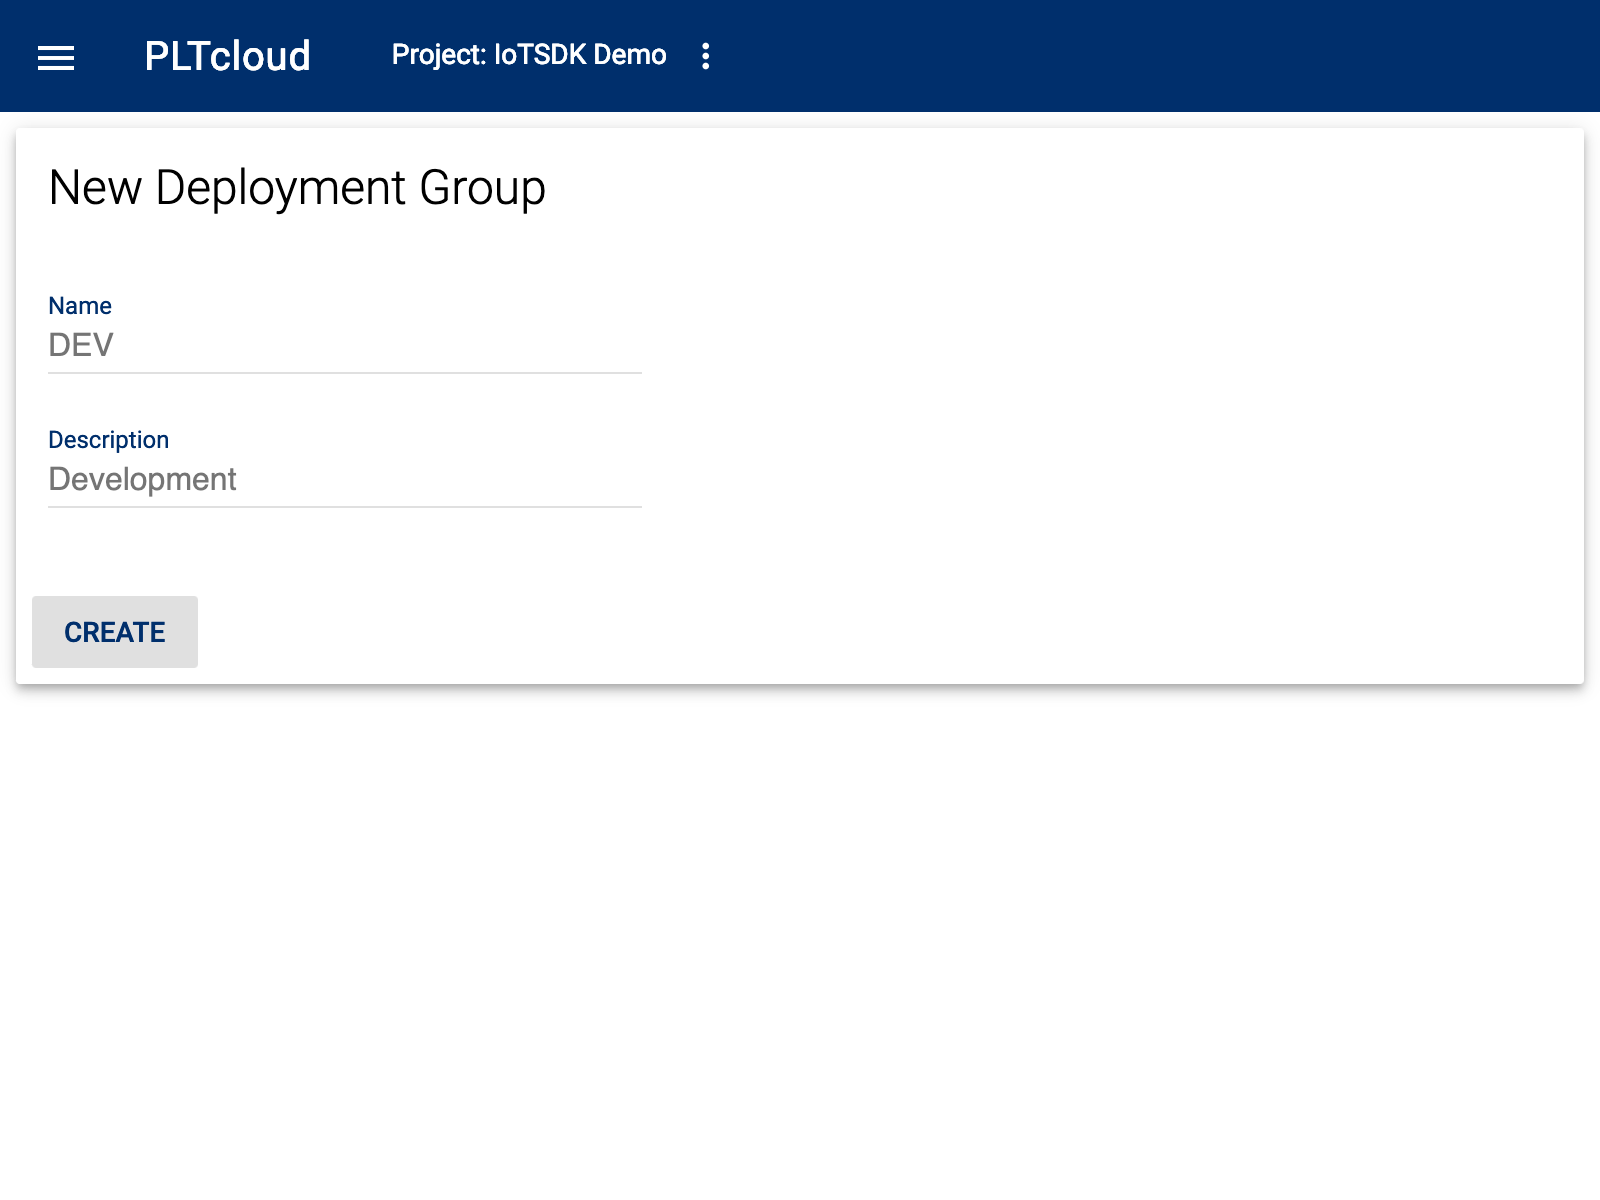 ../../_images/pltCloud-03-NewDeploymentGroup.png